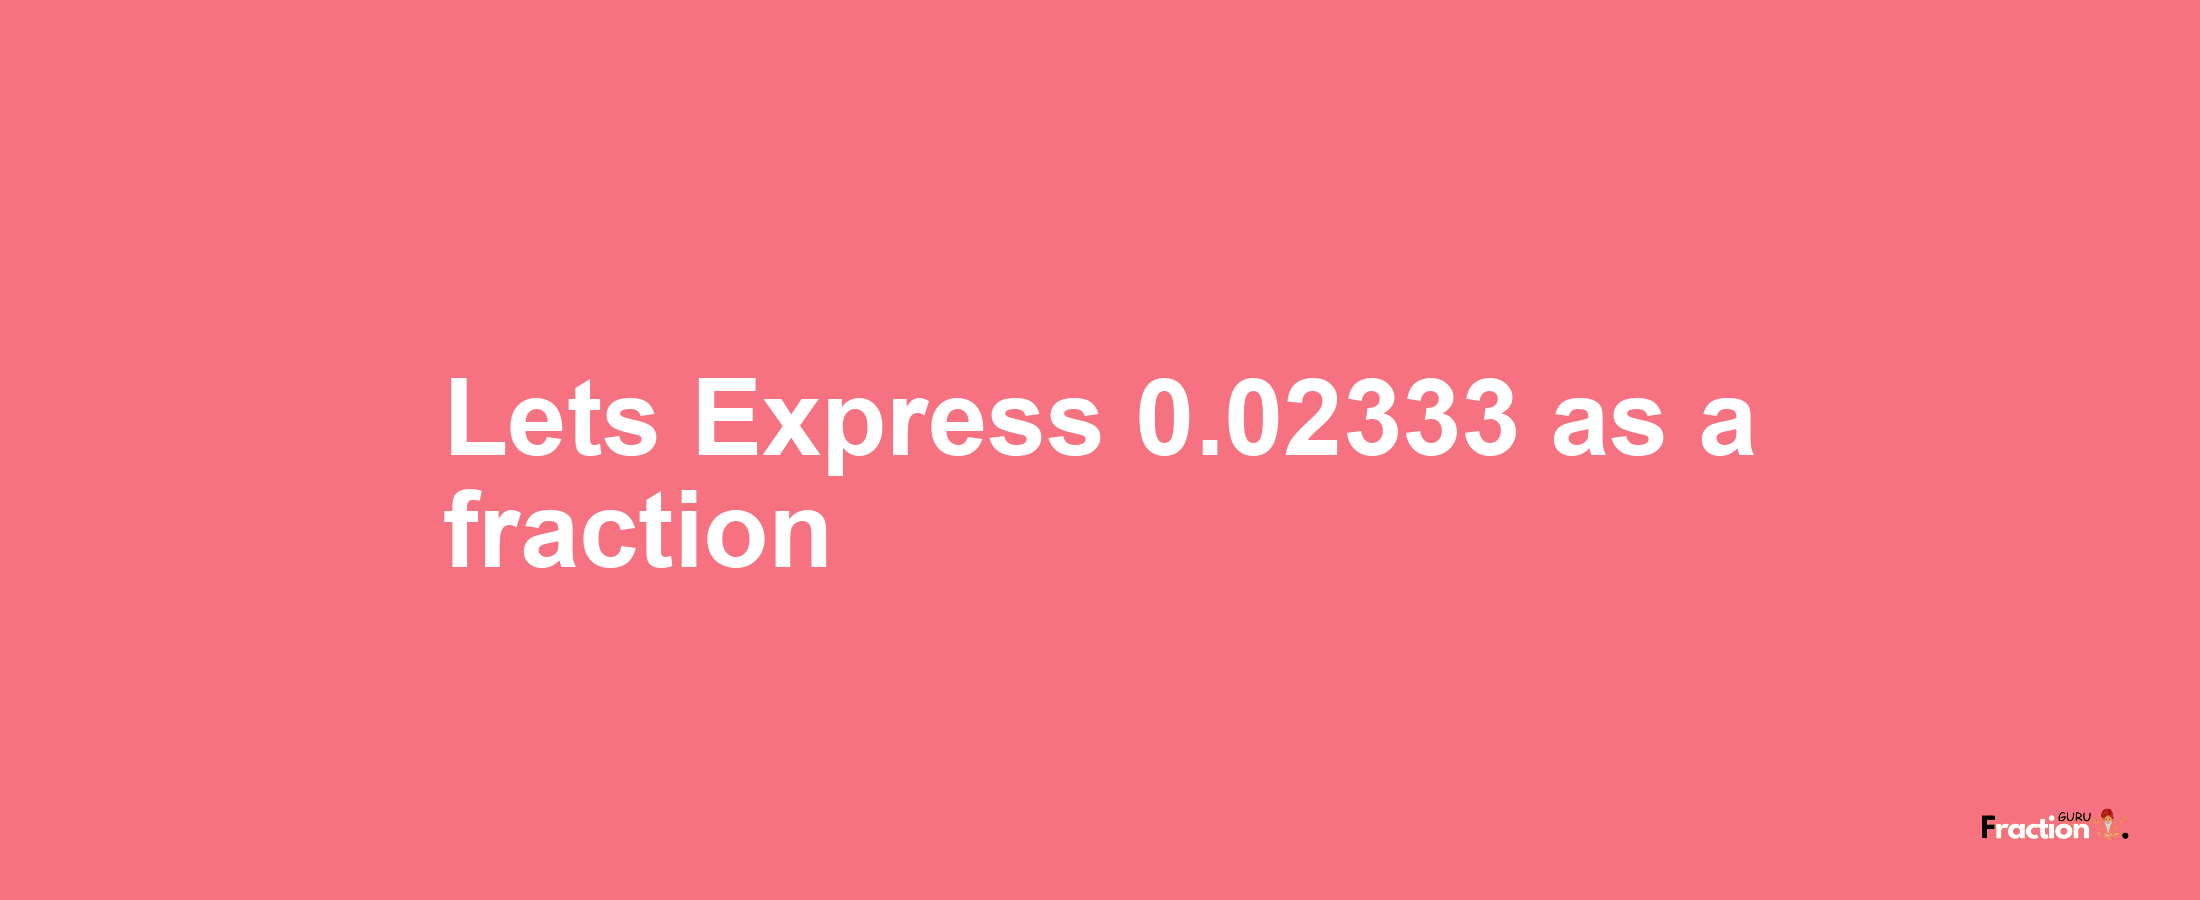 Lets Express 0.02333 as afraction